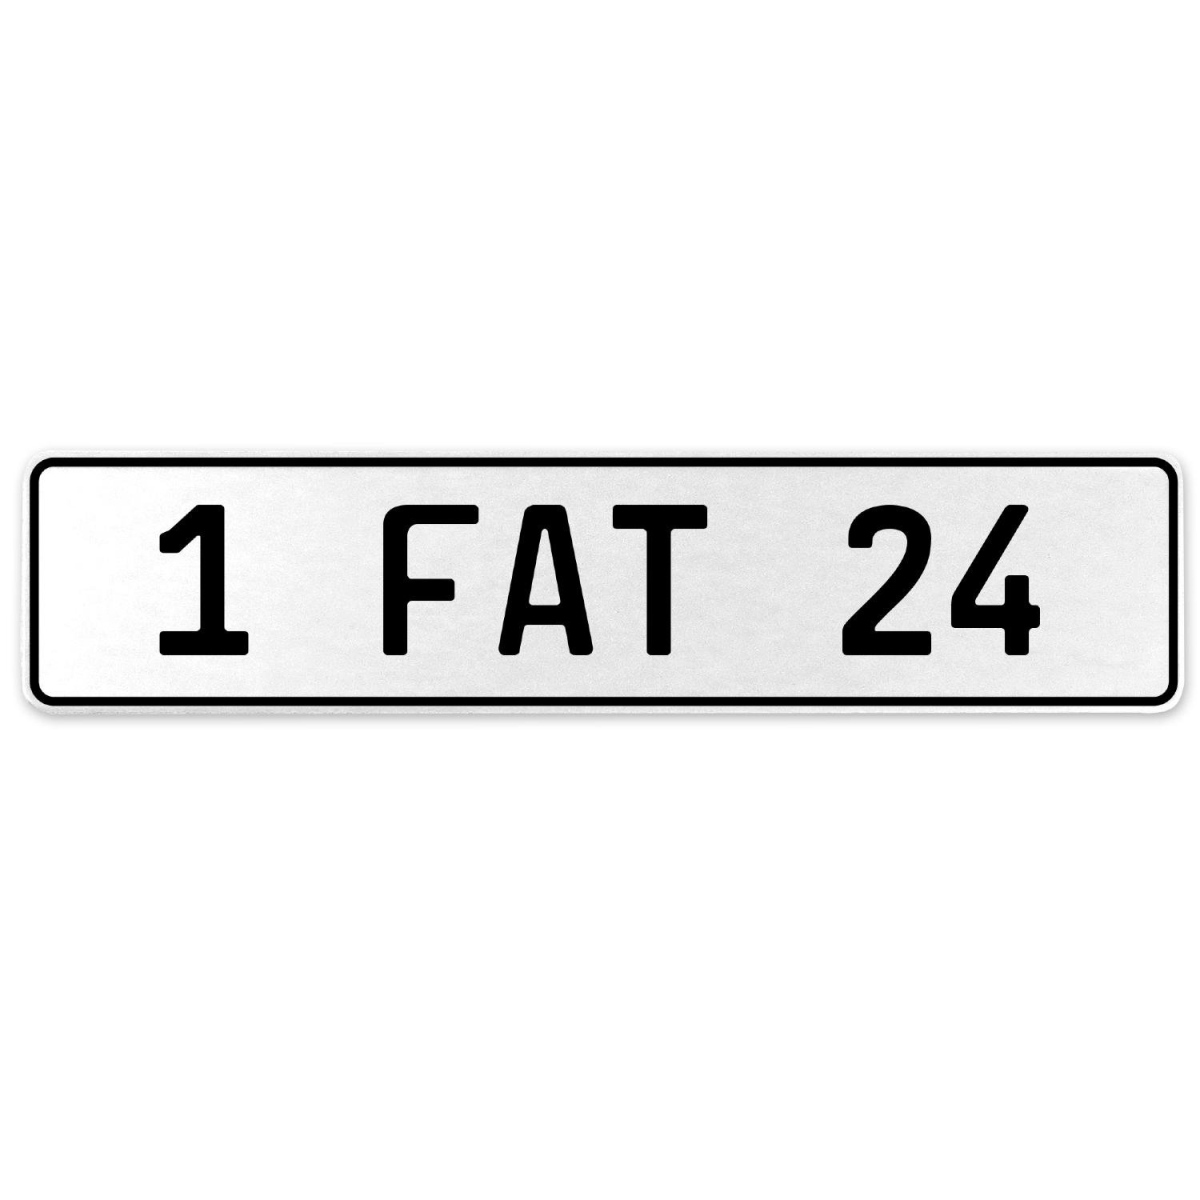 554621 1 Fat 24 - White Aluminum Street Sign Mancave Euro Plate Name Door Sign Wall